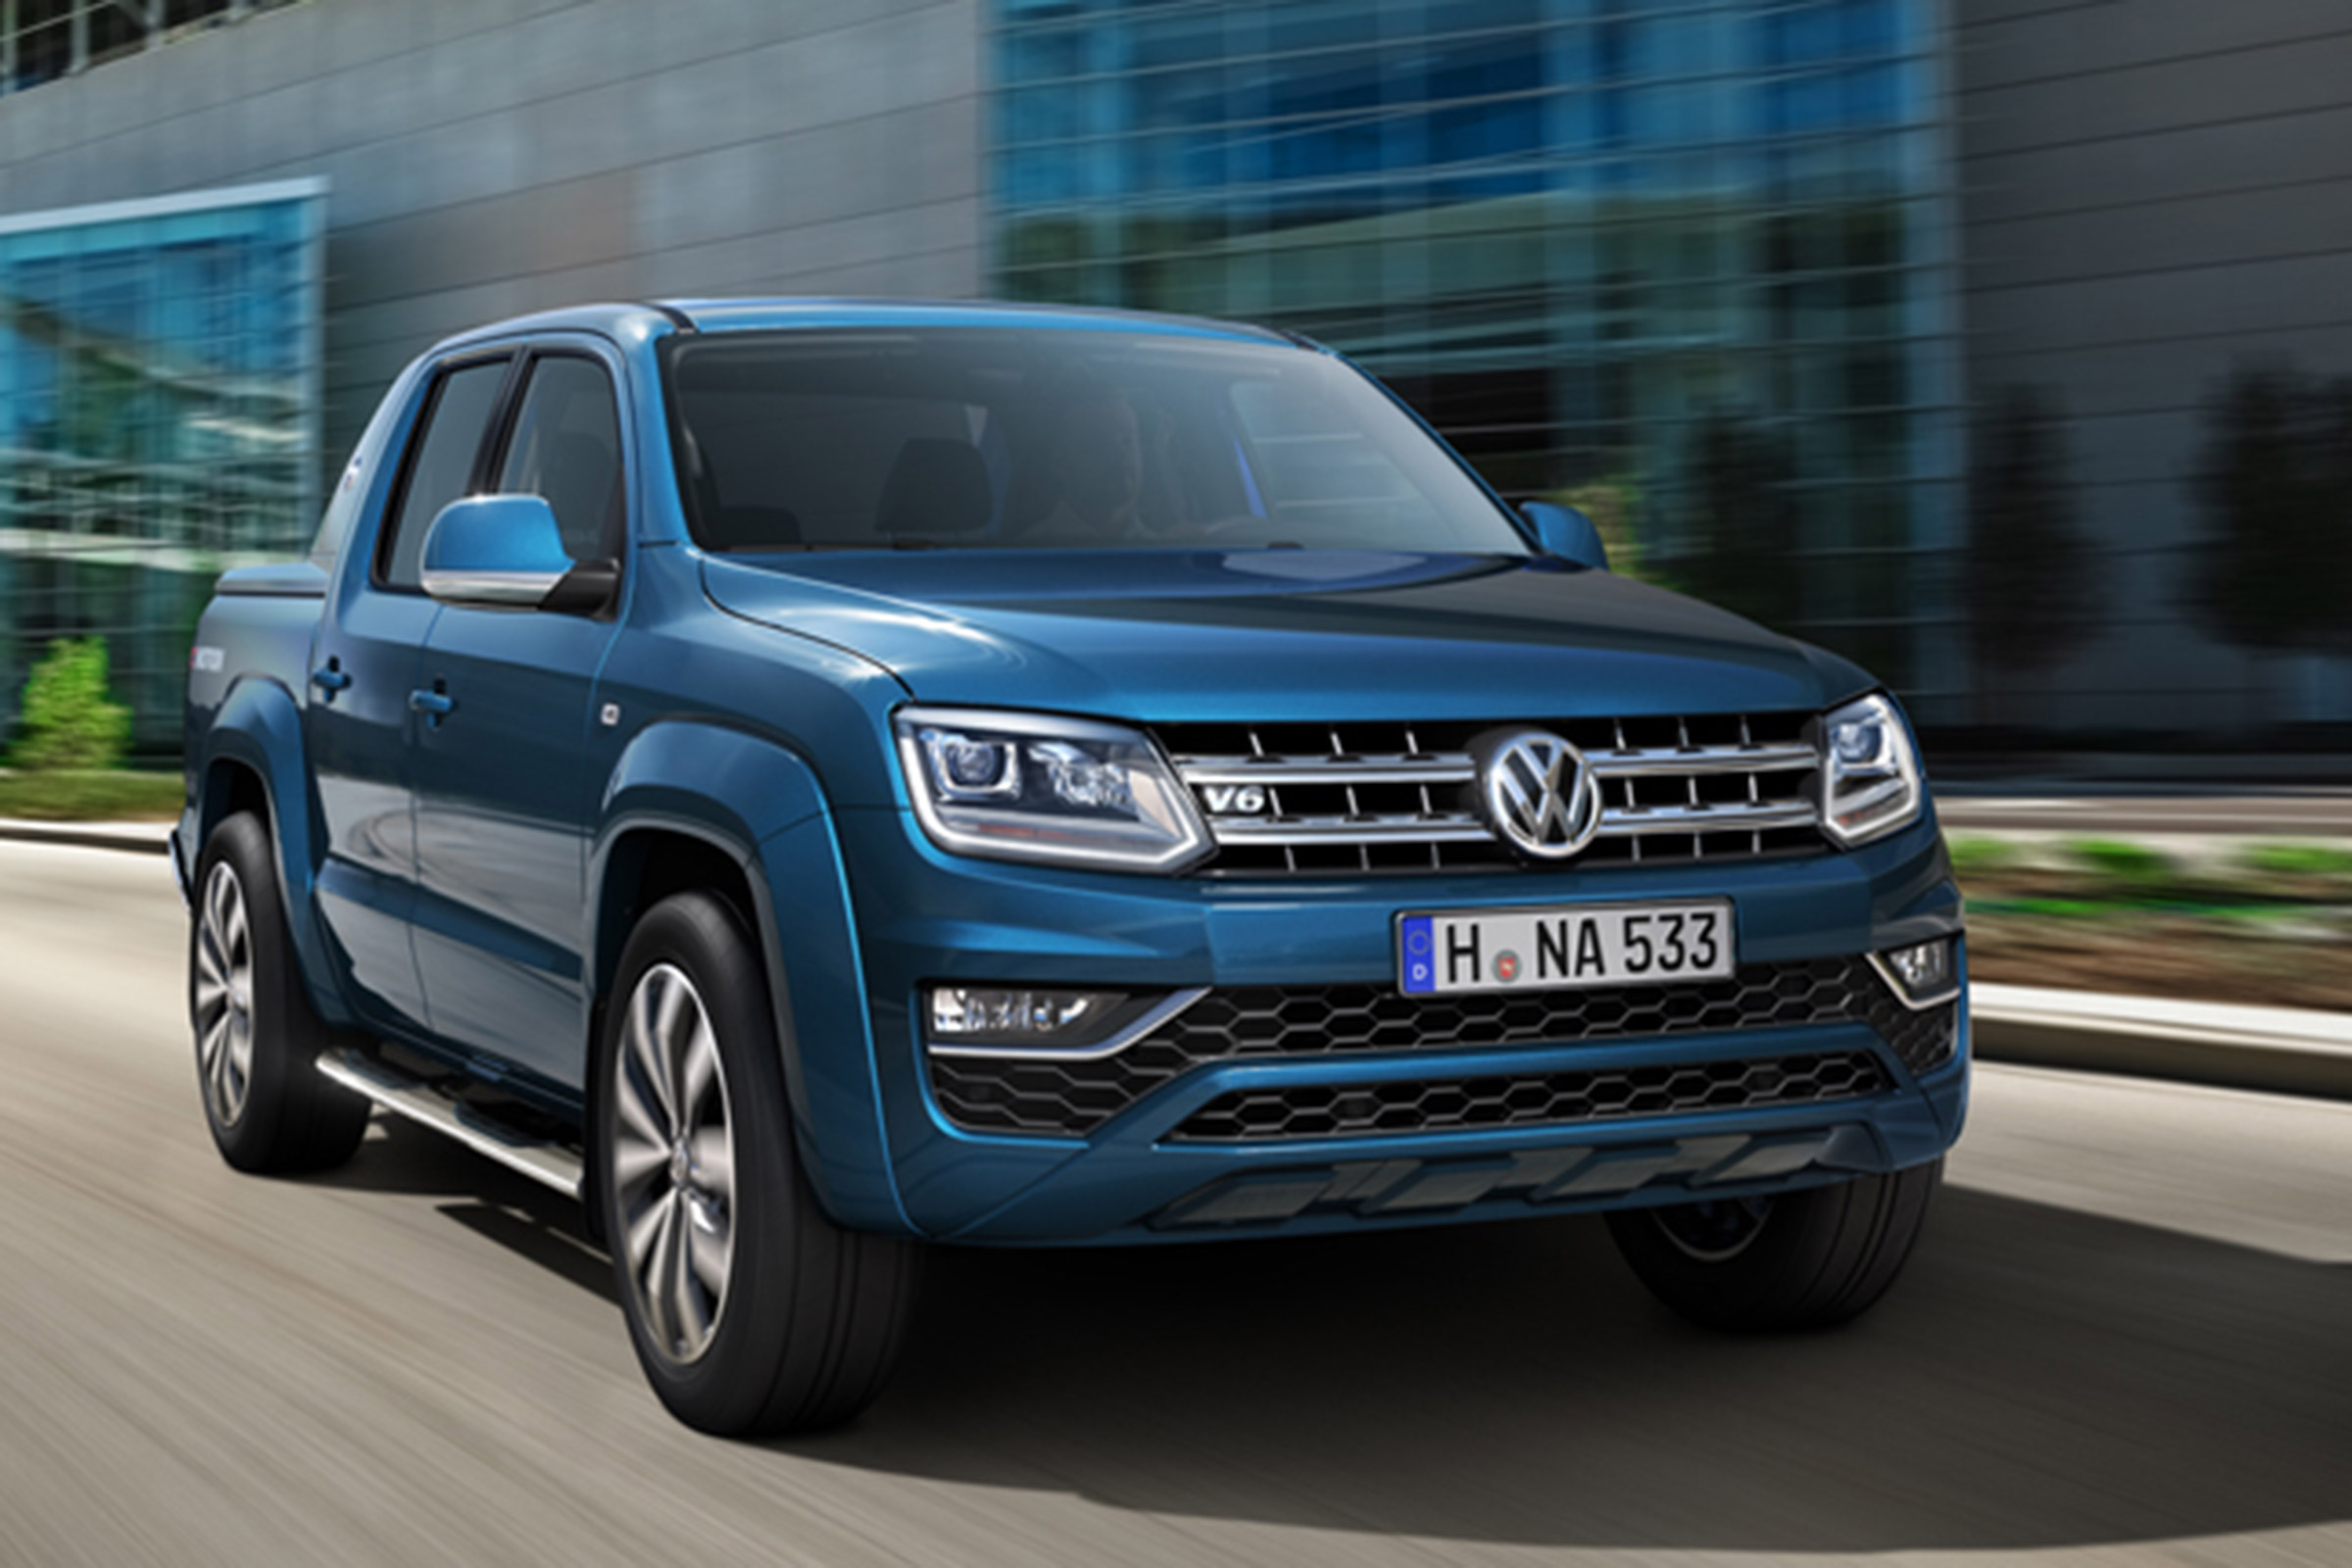 New 2017 VW Amarok on sale now, launch prices revealed 